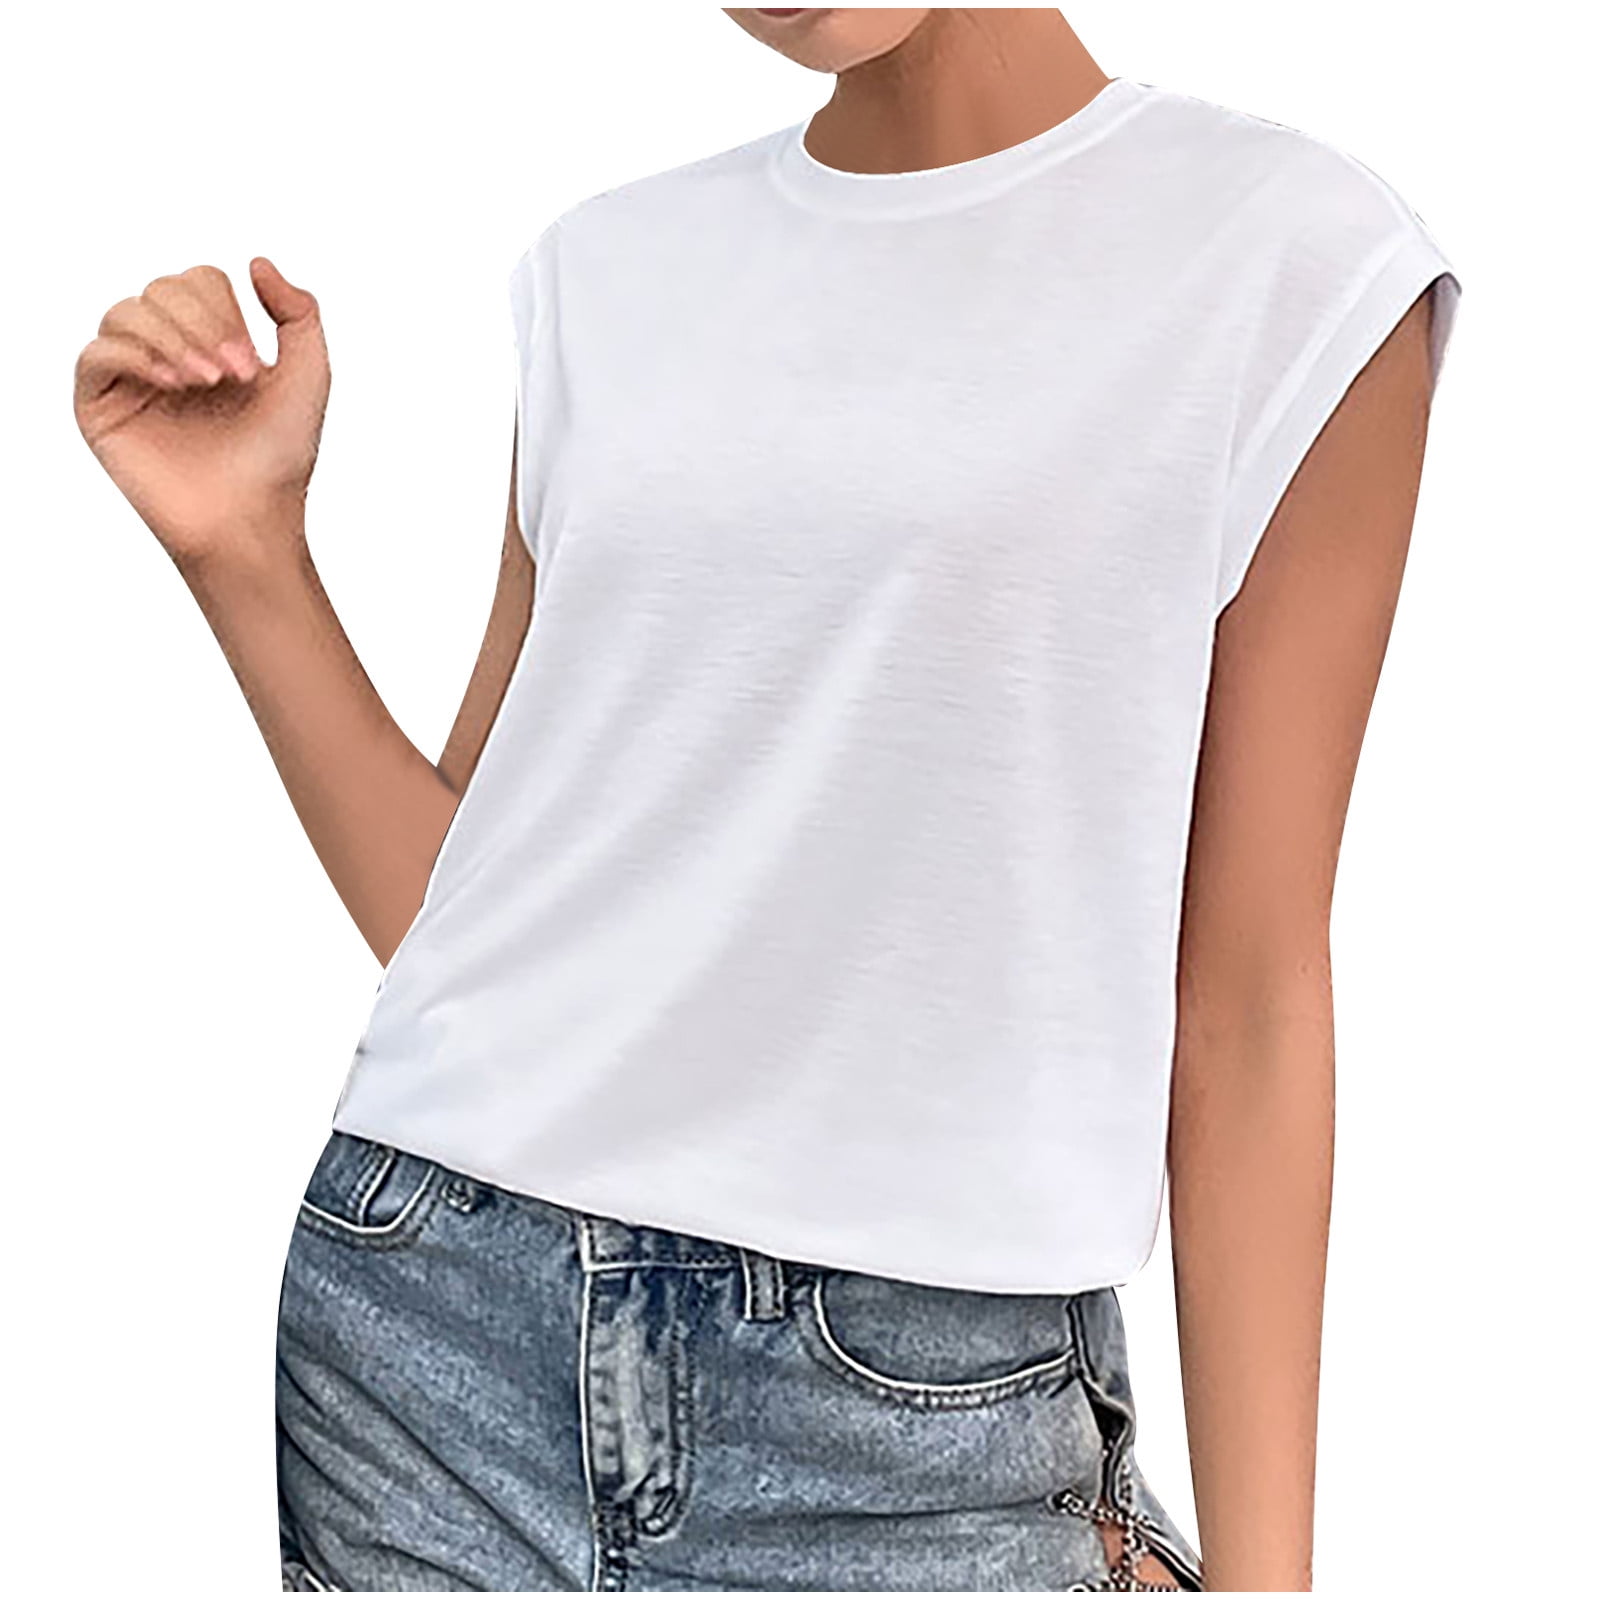 YYDGH Women's Cap Sleeve Tank Top Crew Neck T Shirts Loose Fit Basic Summer  Casual Workout Tee Tops White S